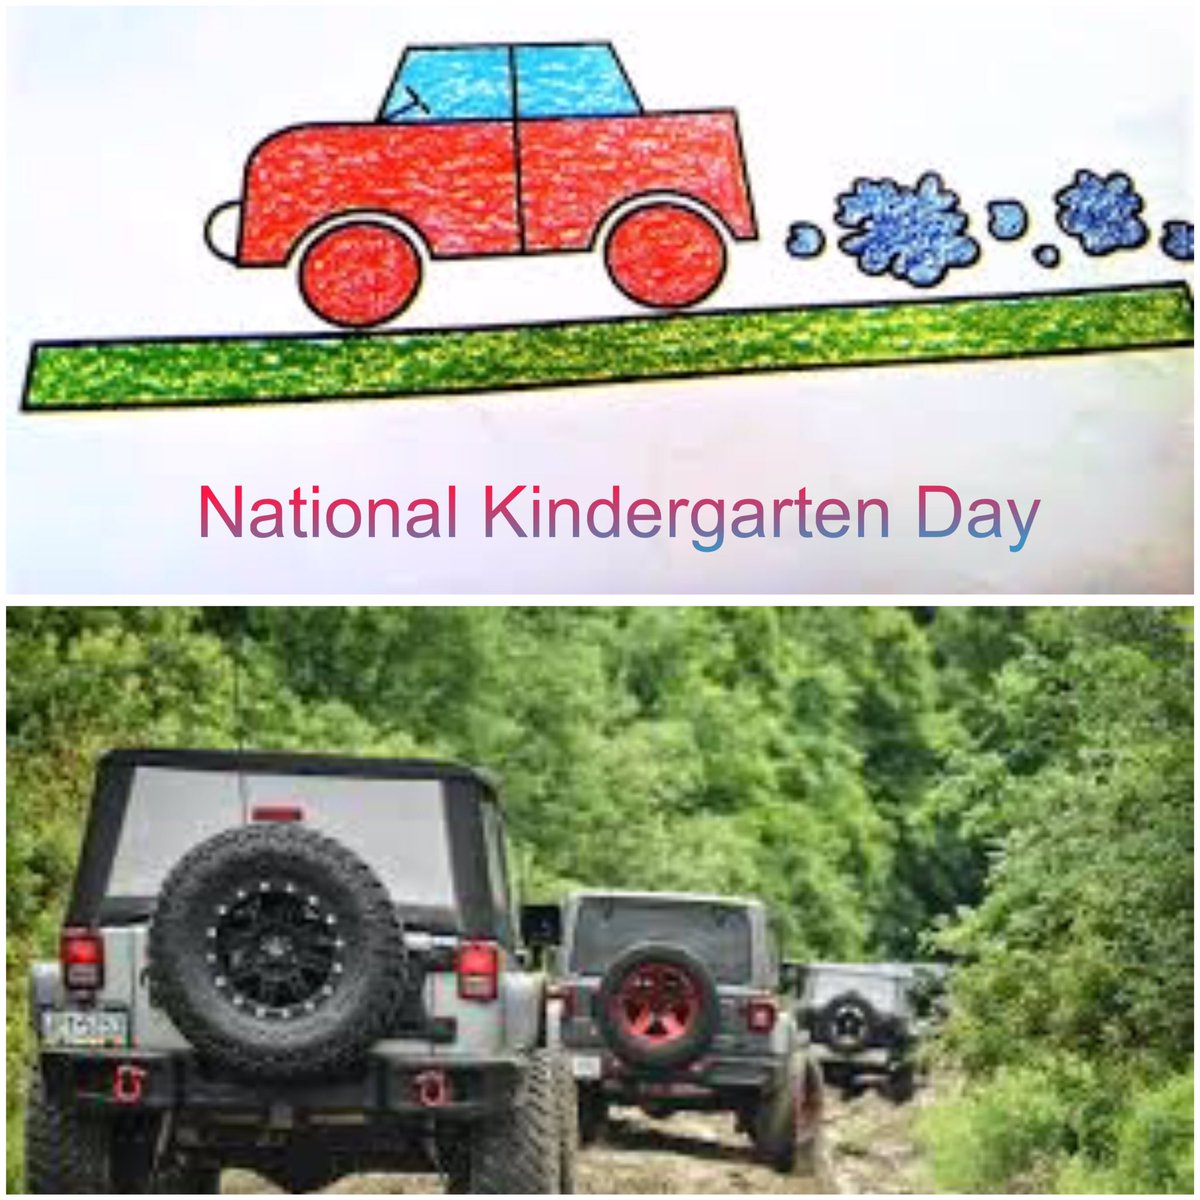 Good morning, Mafia! It’s #NationalKindergartenDay so does that mean we stick to the easy trails? Have fun out there! 😃